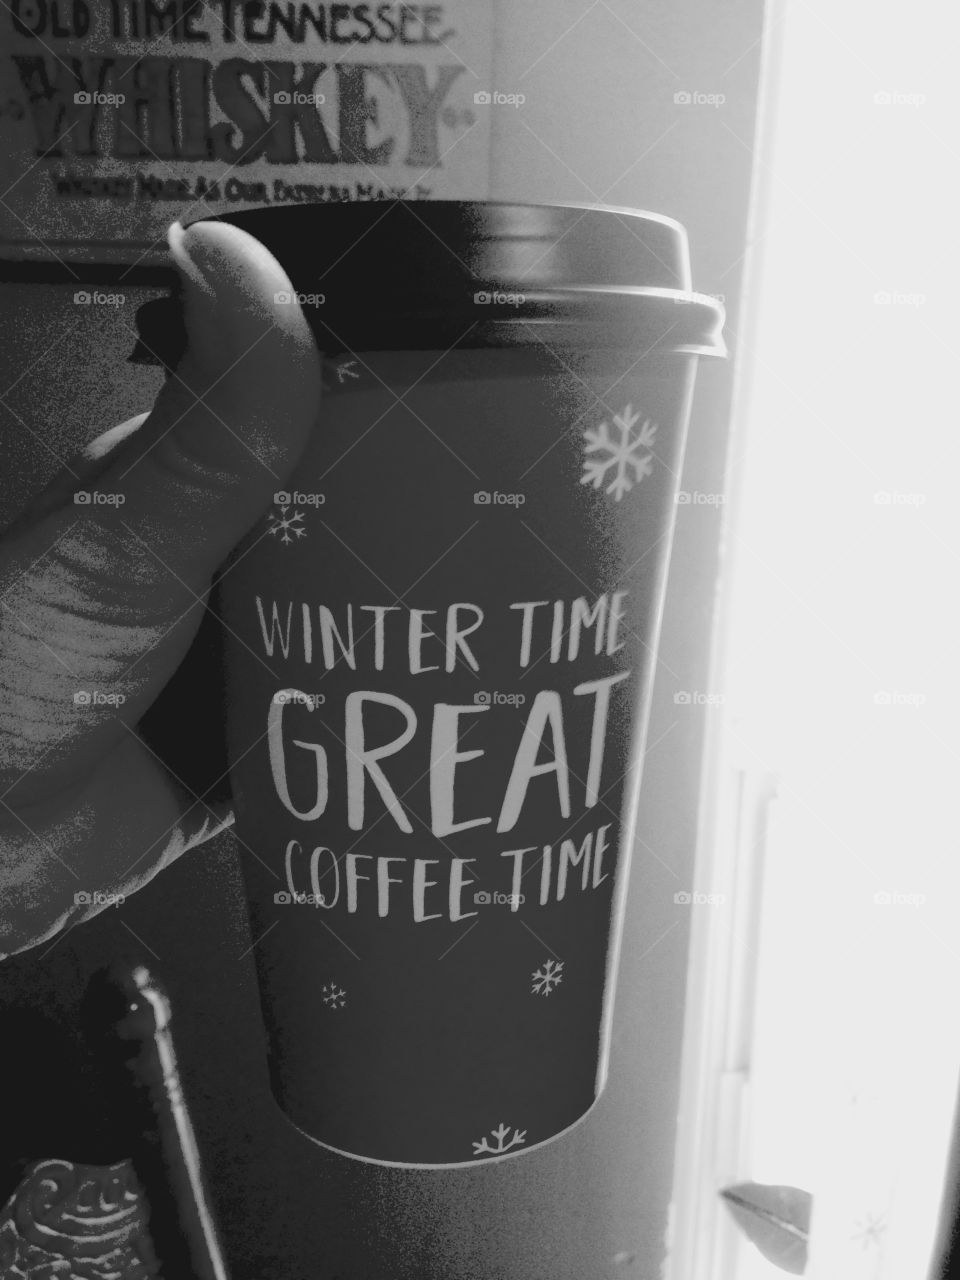 Winter time great coffee time 